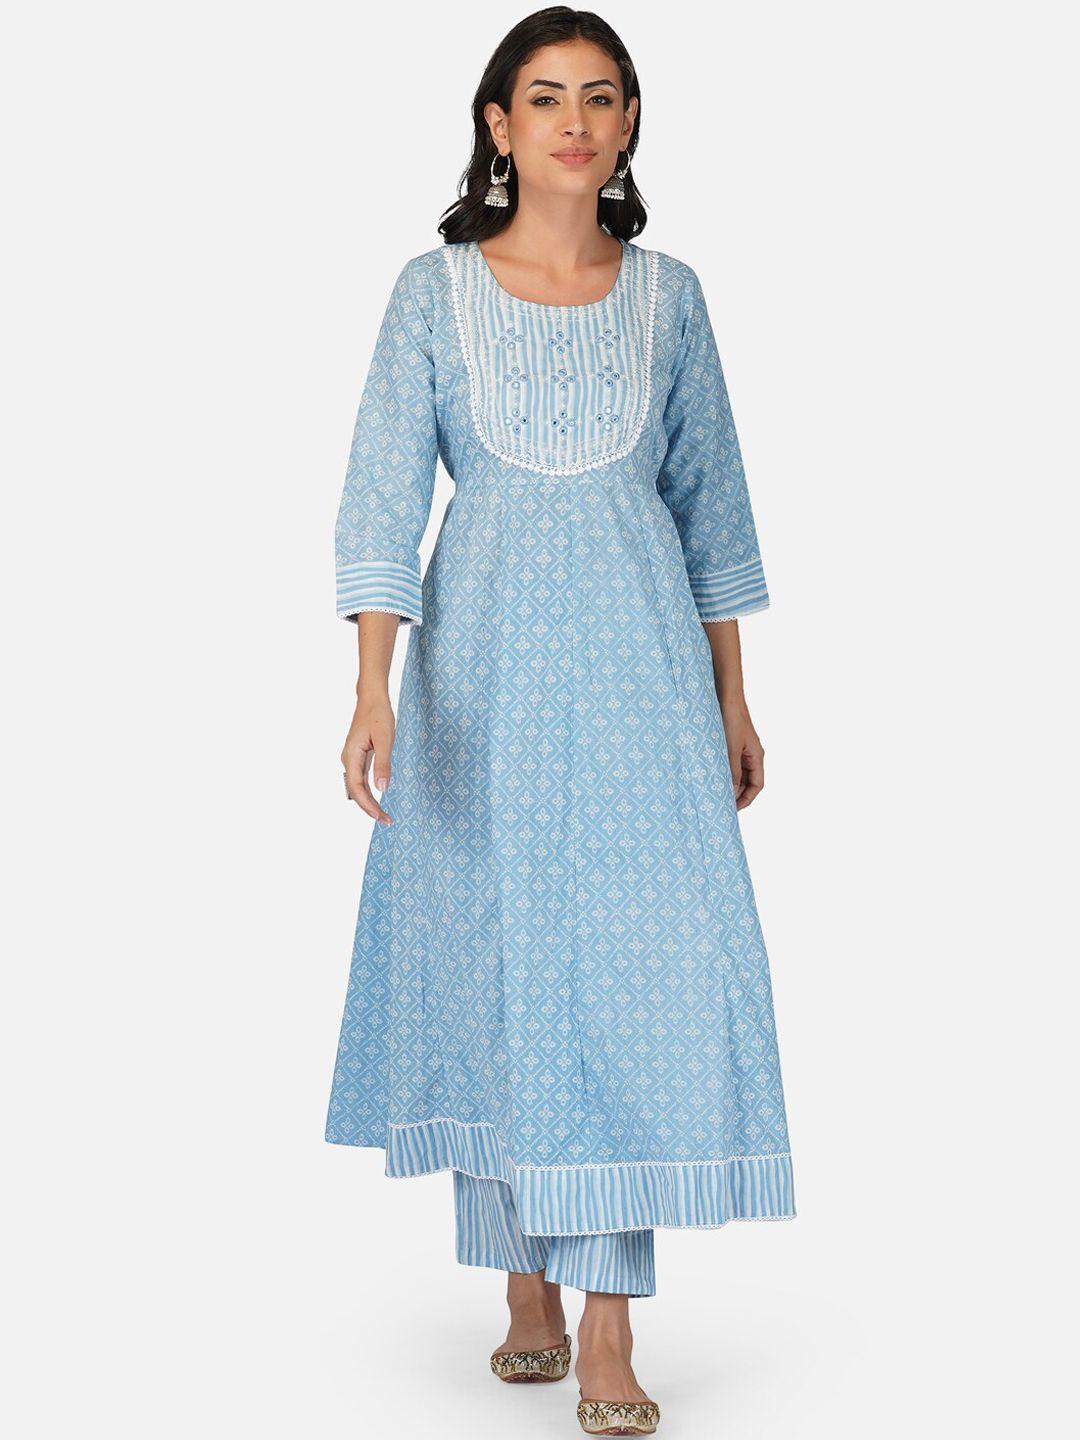 aarti fashion women blue & white floral embroidered kurta with trousers & with dupatta